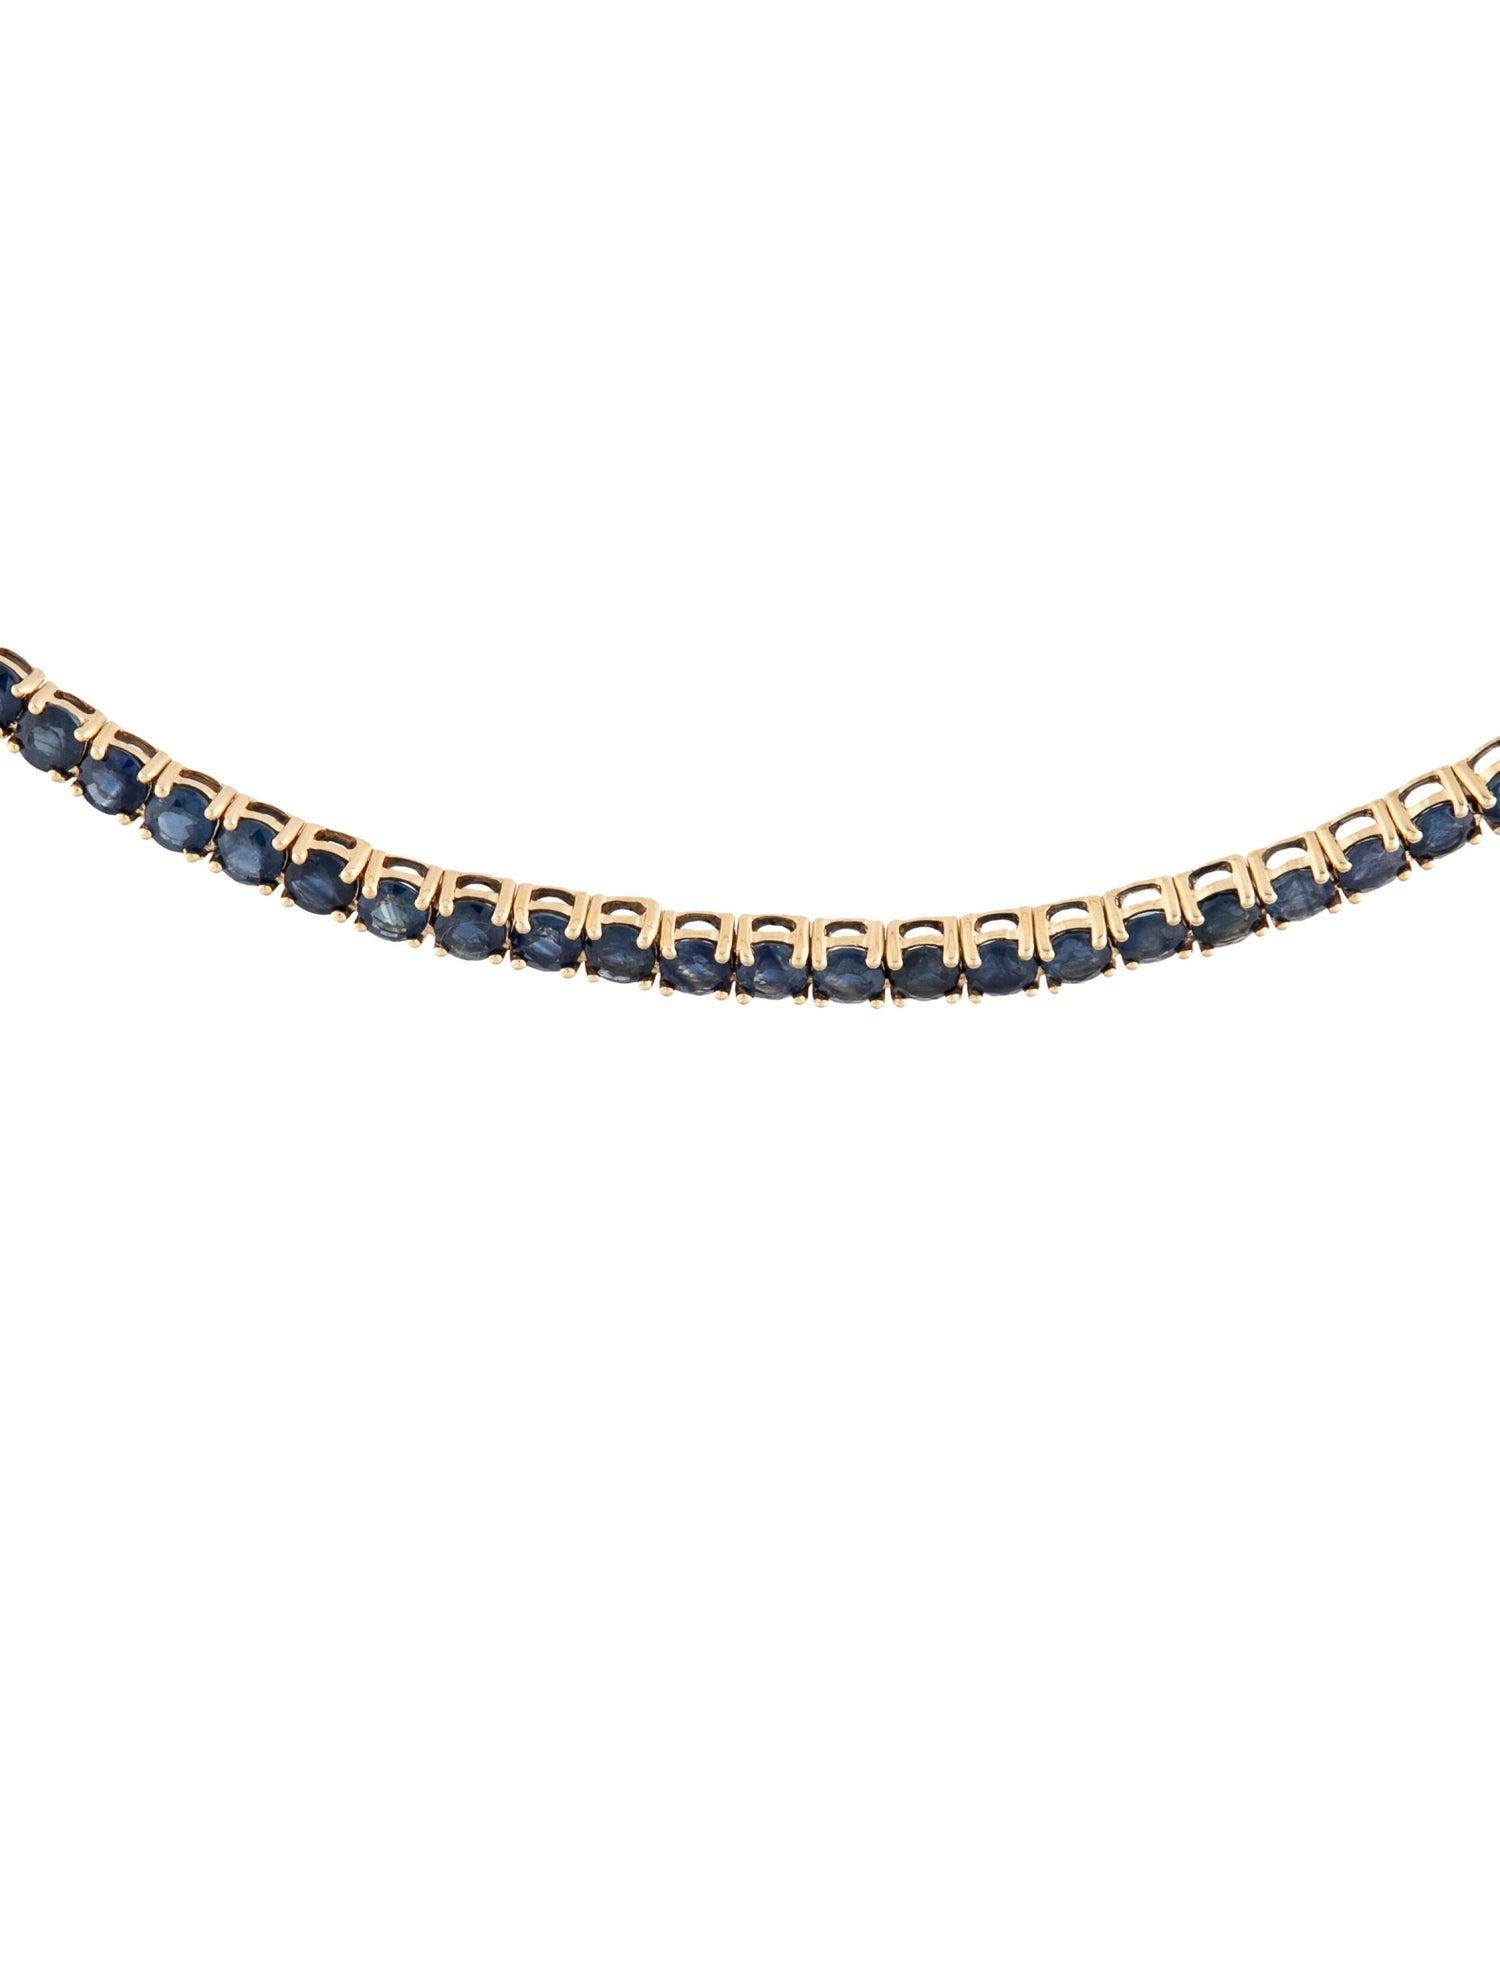 Women's 14K Sapphire Collar Necklace 12.42ctw - Stunning Statement Piece for Glamour For Sale